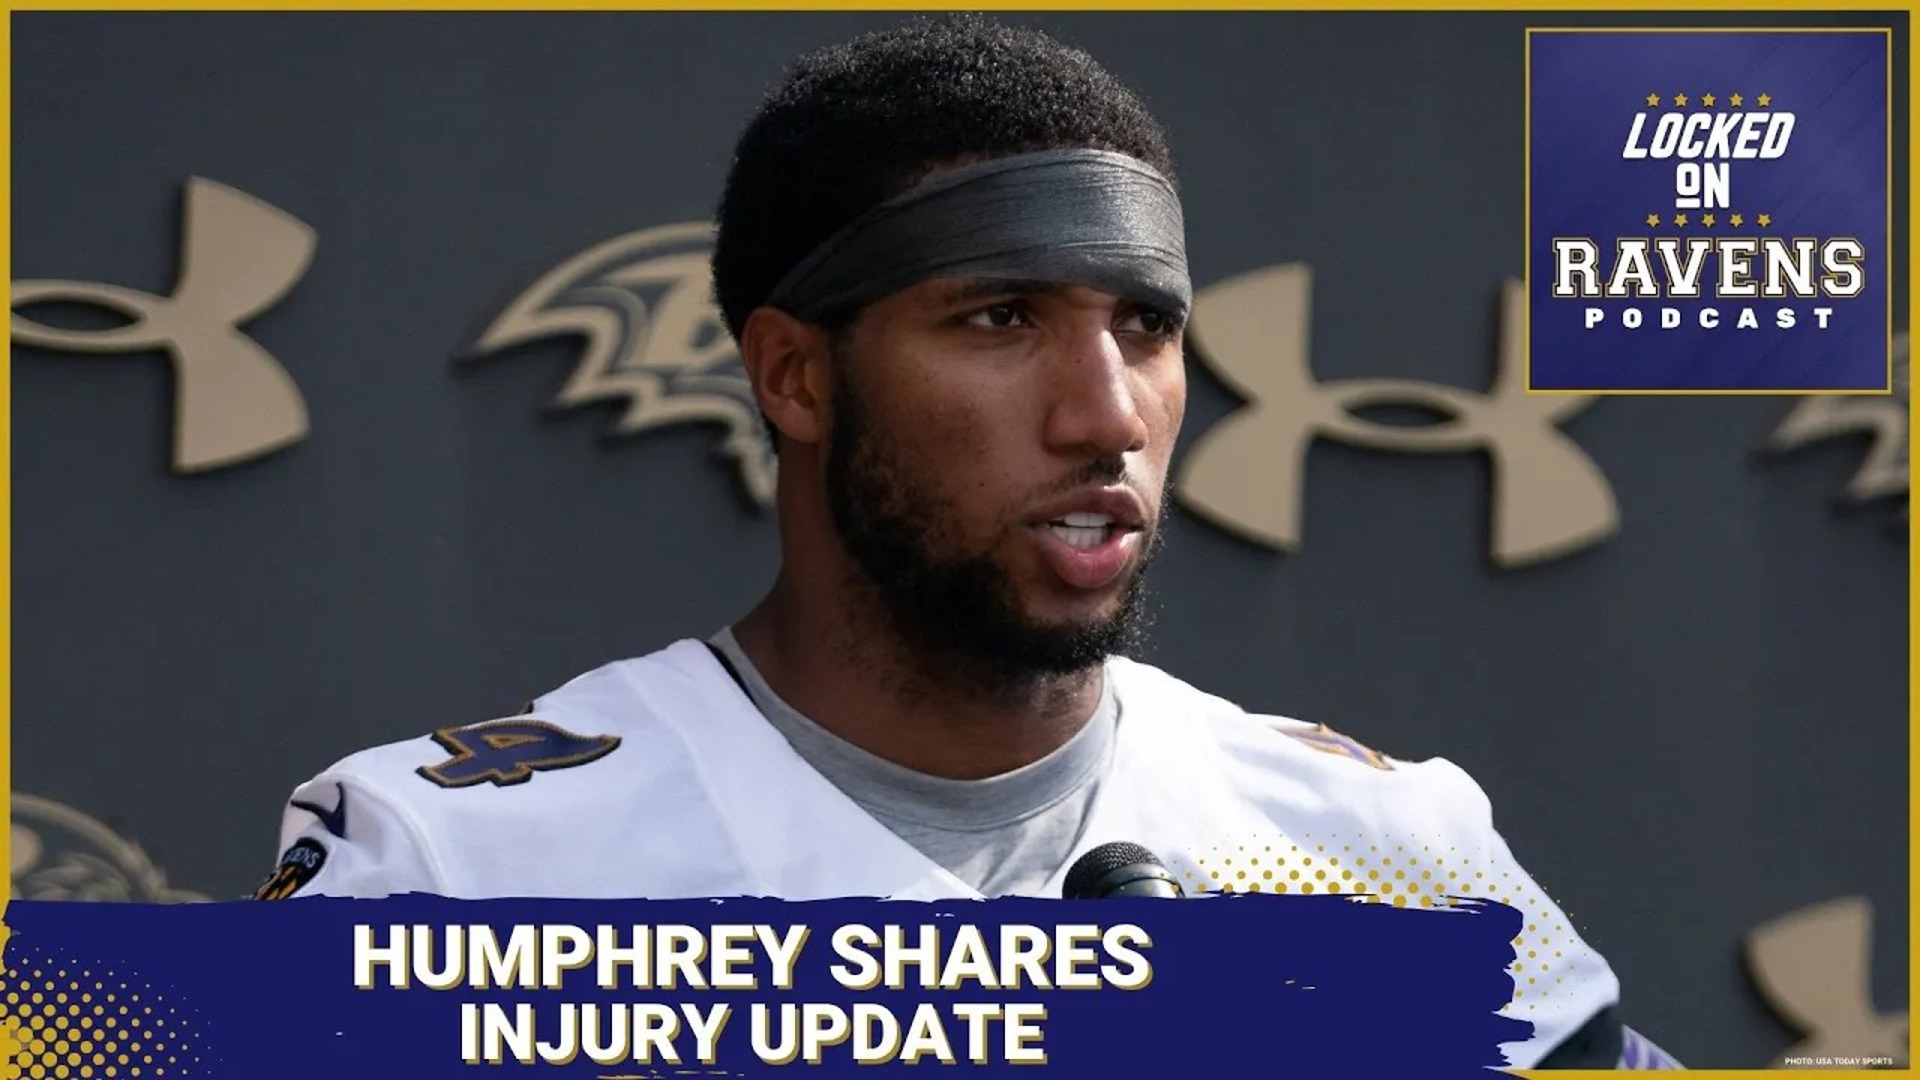 We discuss the injury update that Baltimore Ravens cornerback Marlon Humphrey shared about himself as well as the reasons for his early absences with Qadry Ismail.